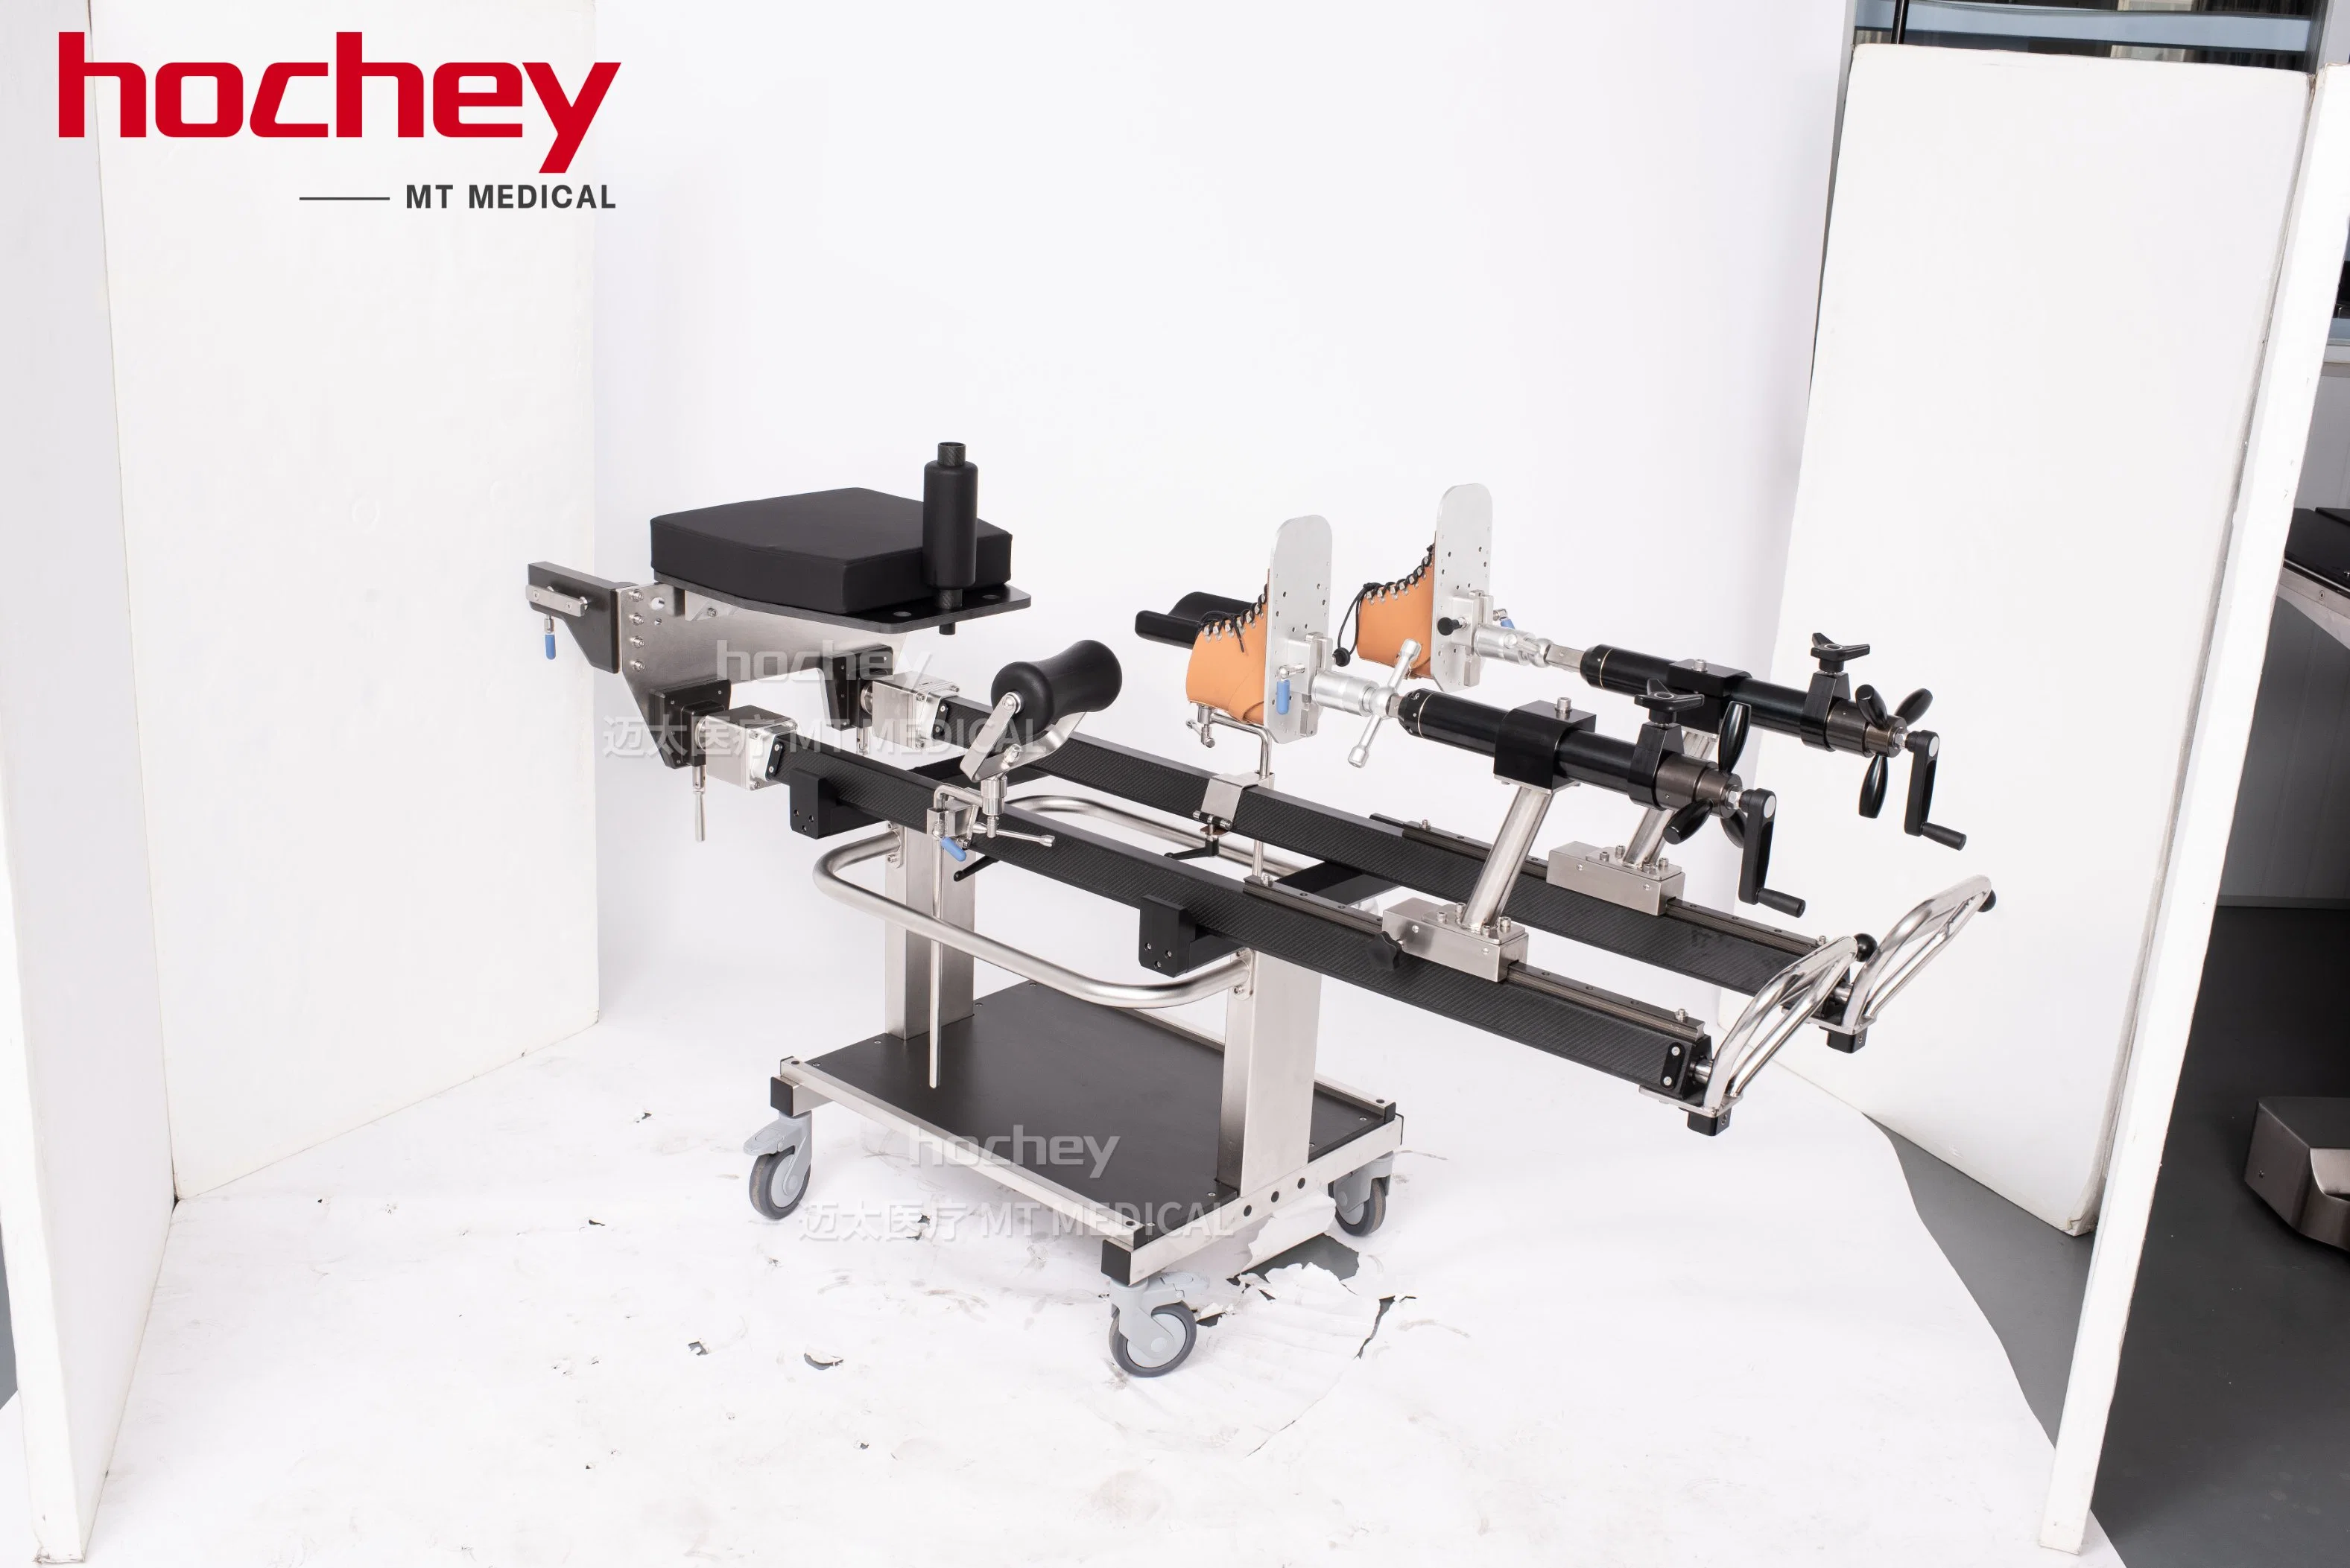 China Manufacturer Cheaper Universal Orthopedic Table Lower Limbs Traction Frame for Operation Table